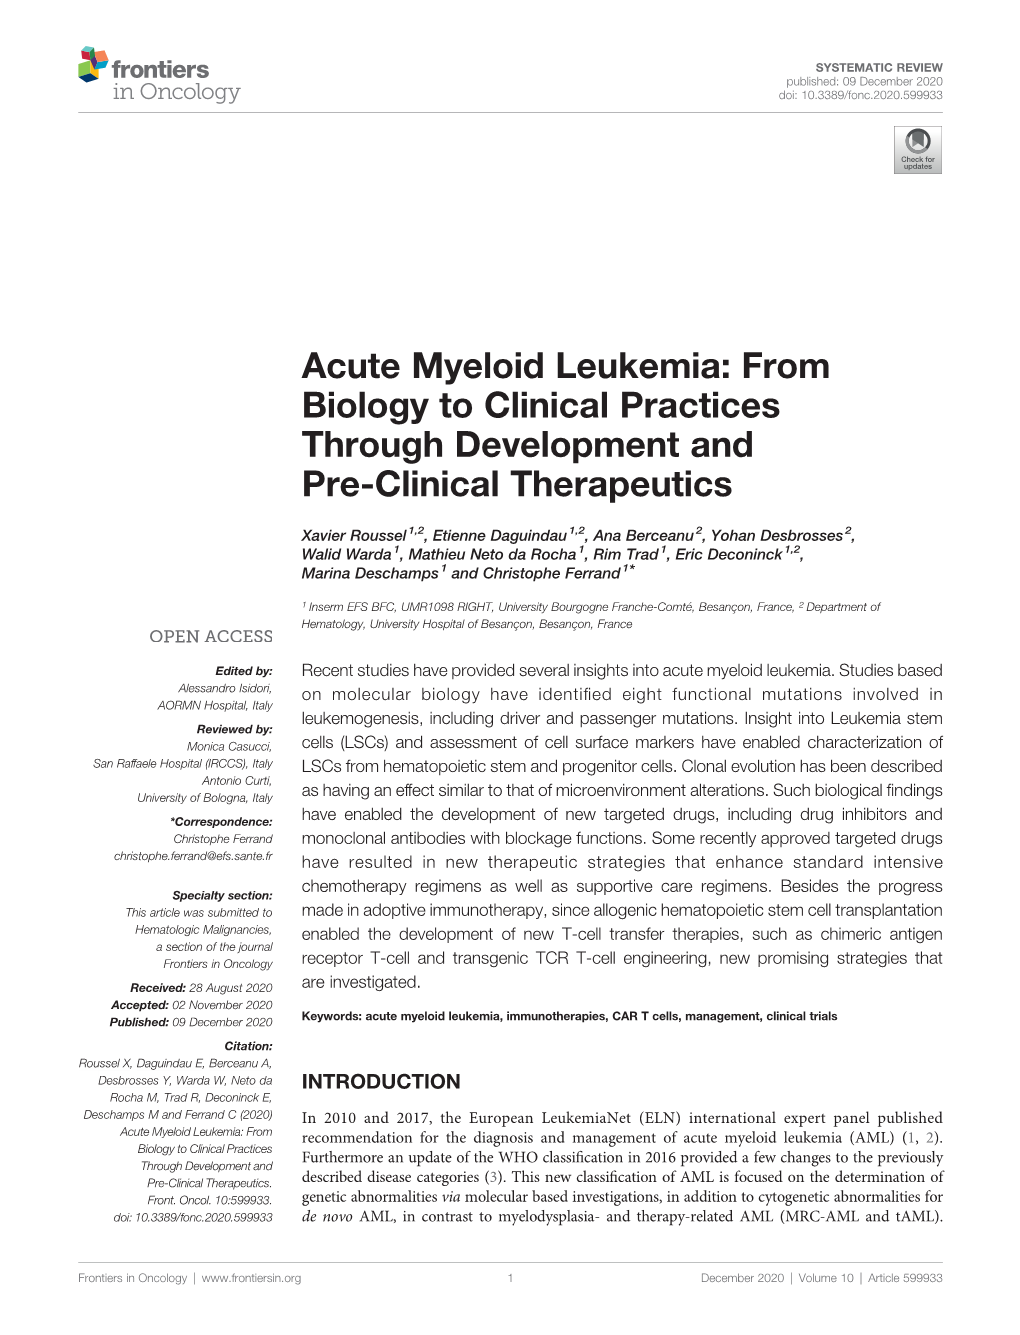 Acute Myeloid Leukemia: from Biology to Clinical Practices Through Development and Pre-Clinical Therapeutics